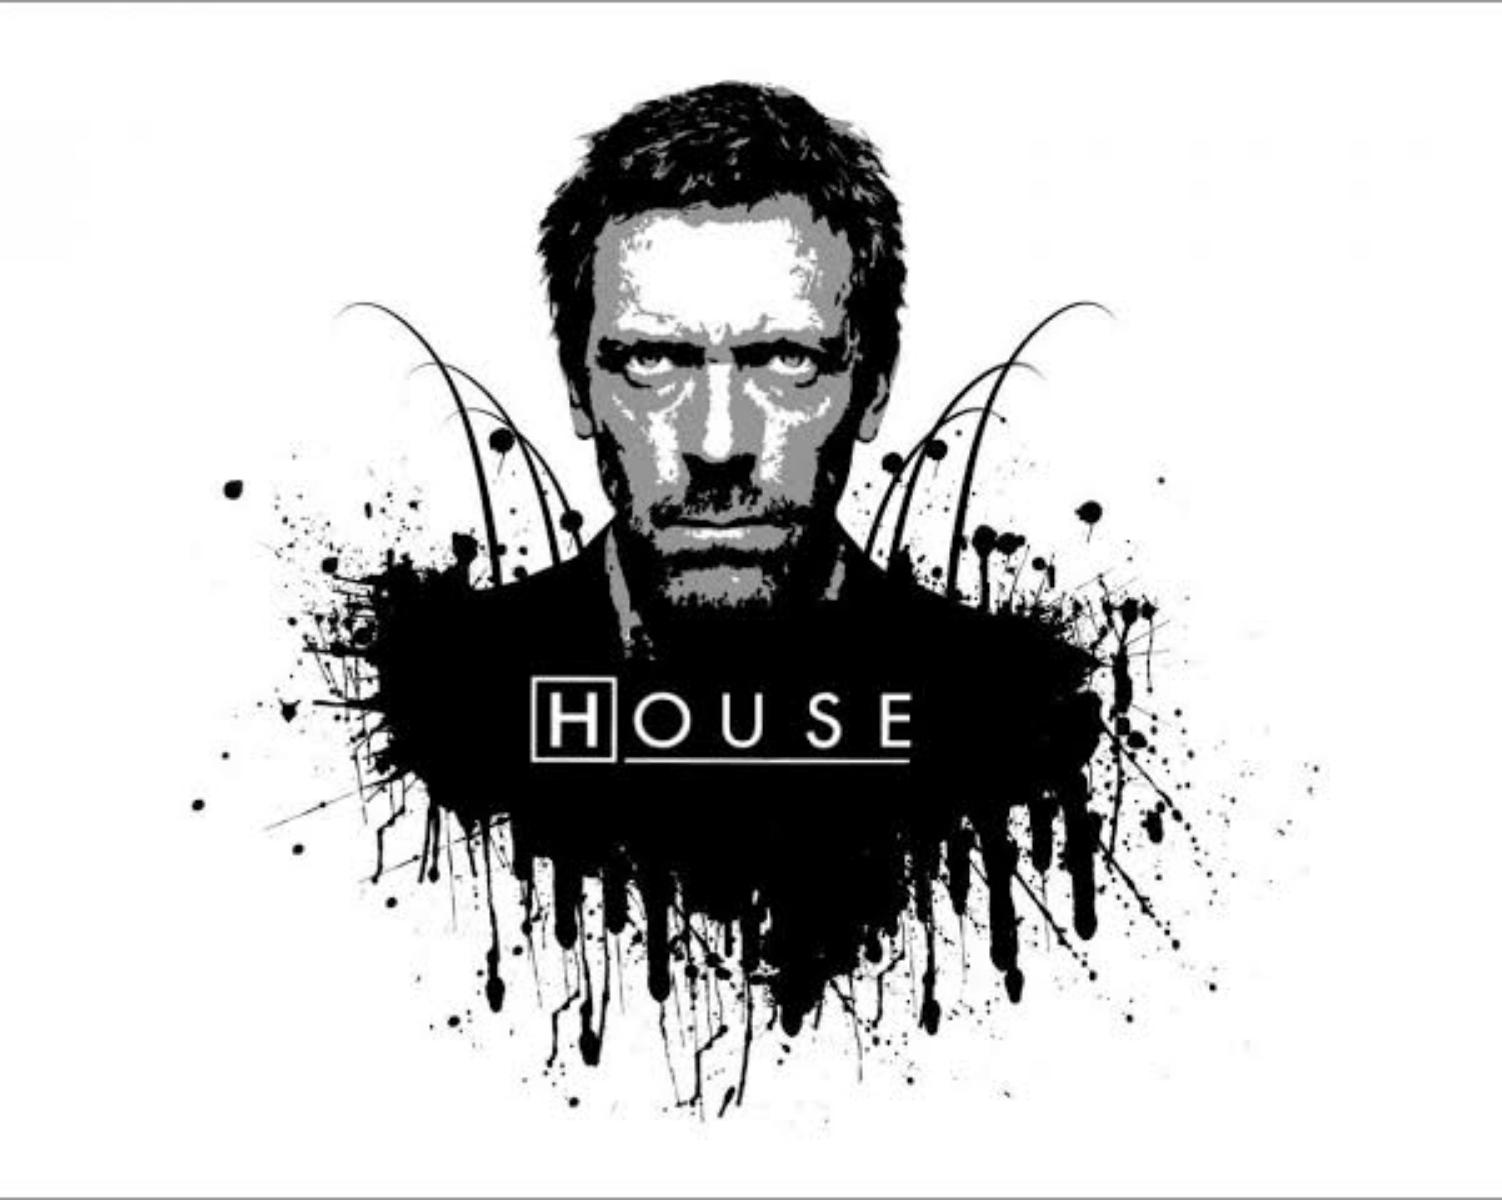 7 Things We Learn From ‘House MD‘ (Dr.Gregory House)